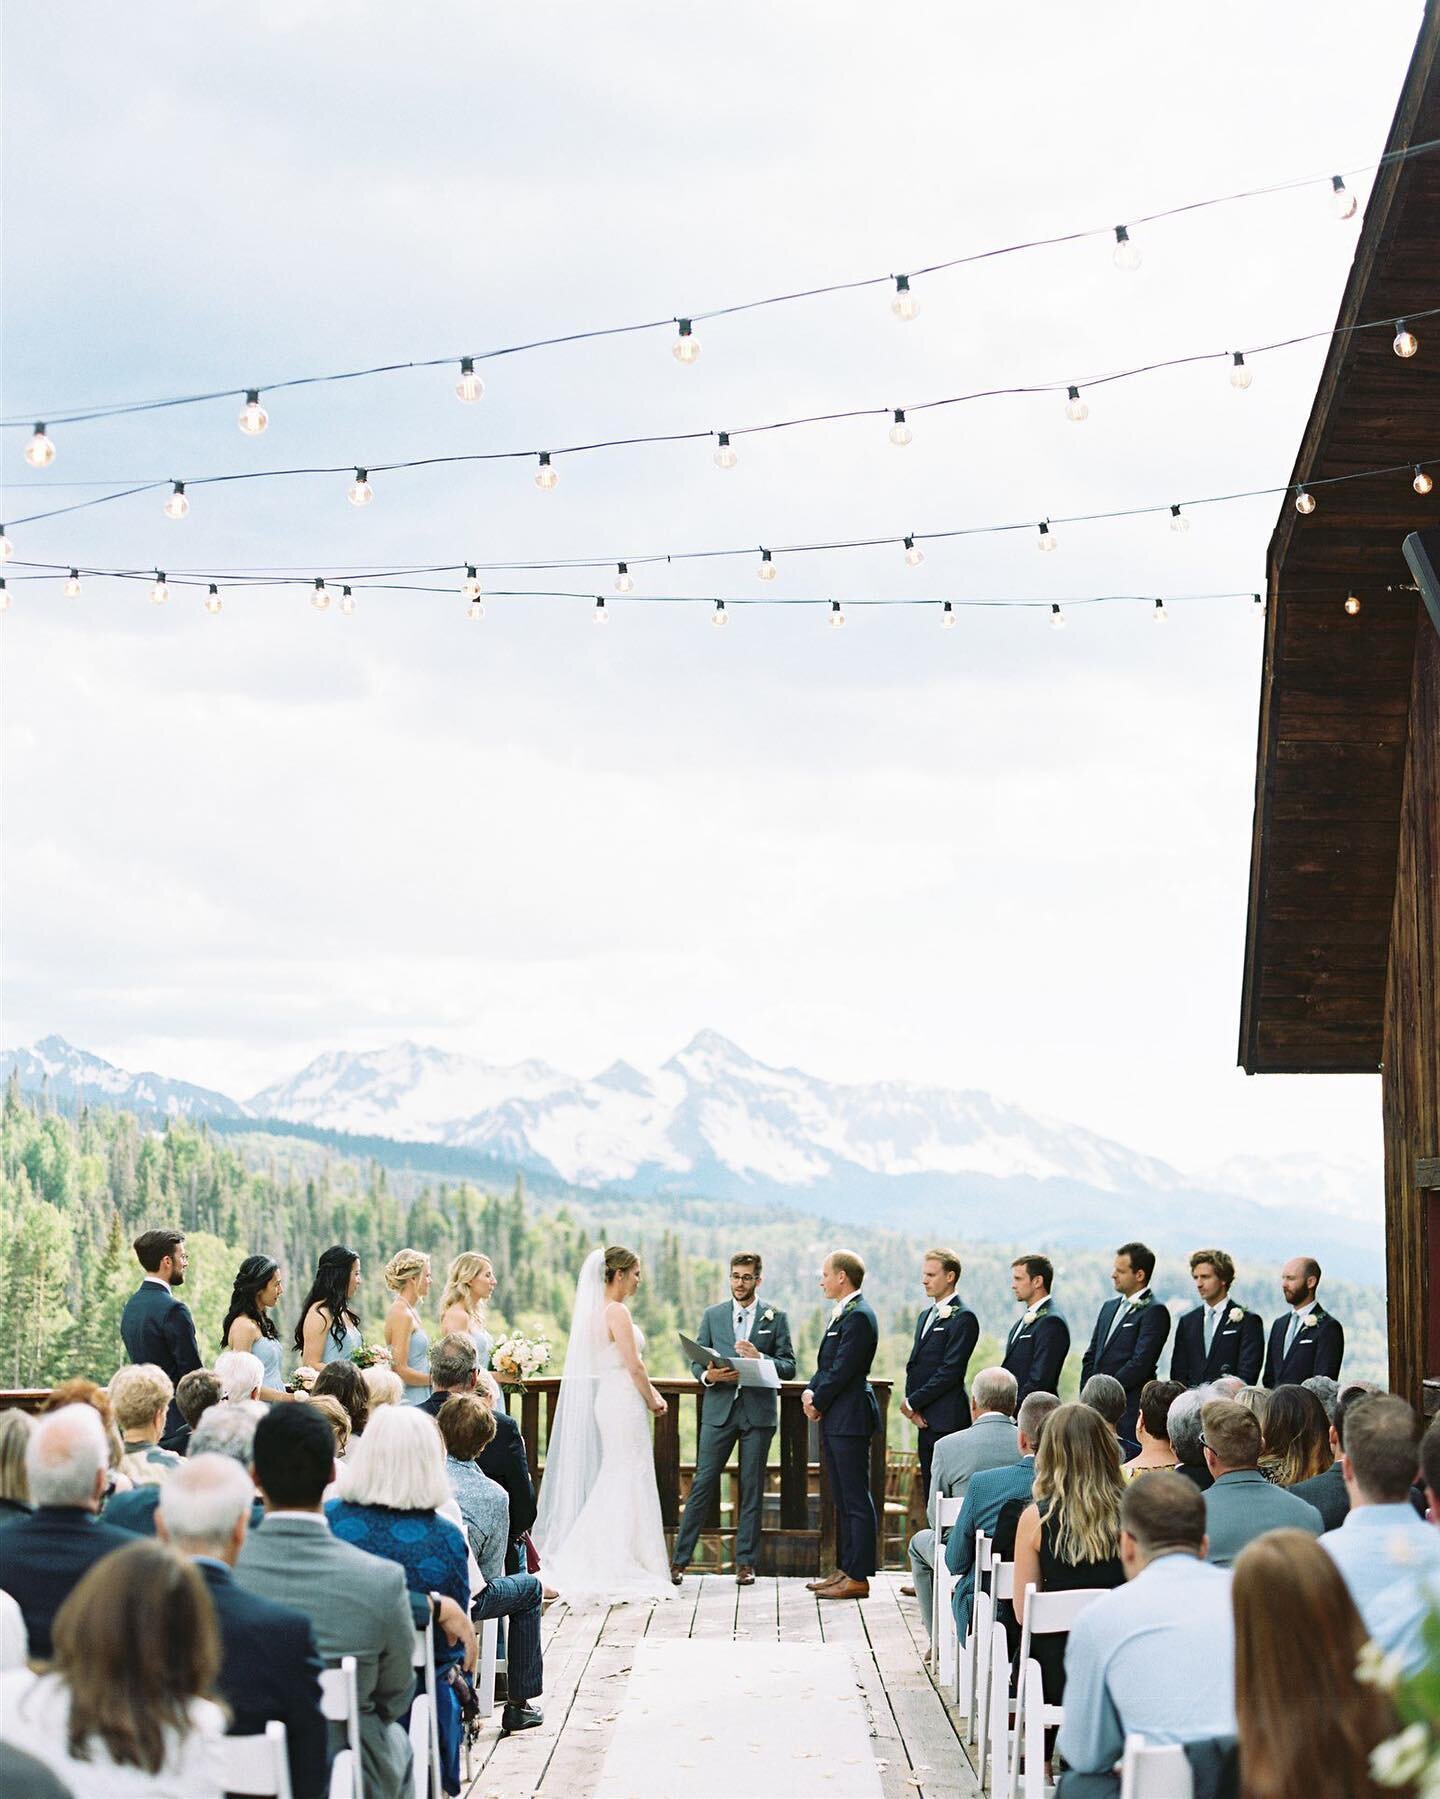 Dear Telluride,
I think about you all the time! 
Sincerely, Jenn
.
.
.
Venue @gorrono_ranch
Photography @faithwright
Florals @mjmdesignsllc
.
#telluridewedding #tellurideweddingplanner #goronnoranchwedding #gorronoranch #mountainwedding #mountainwedd